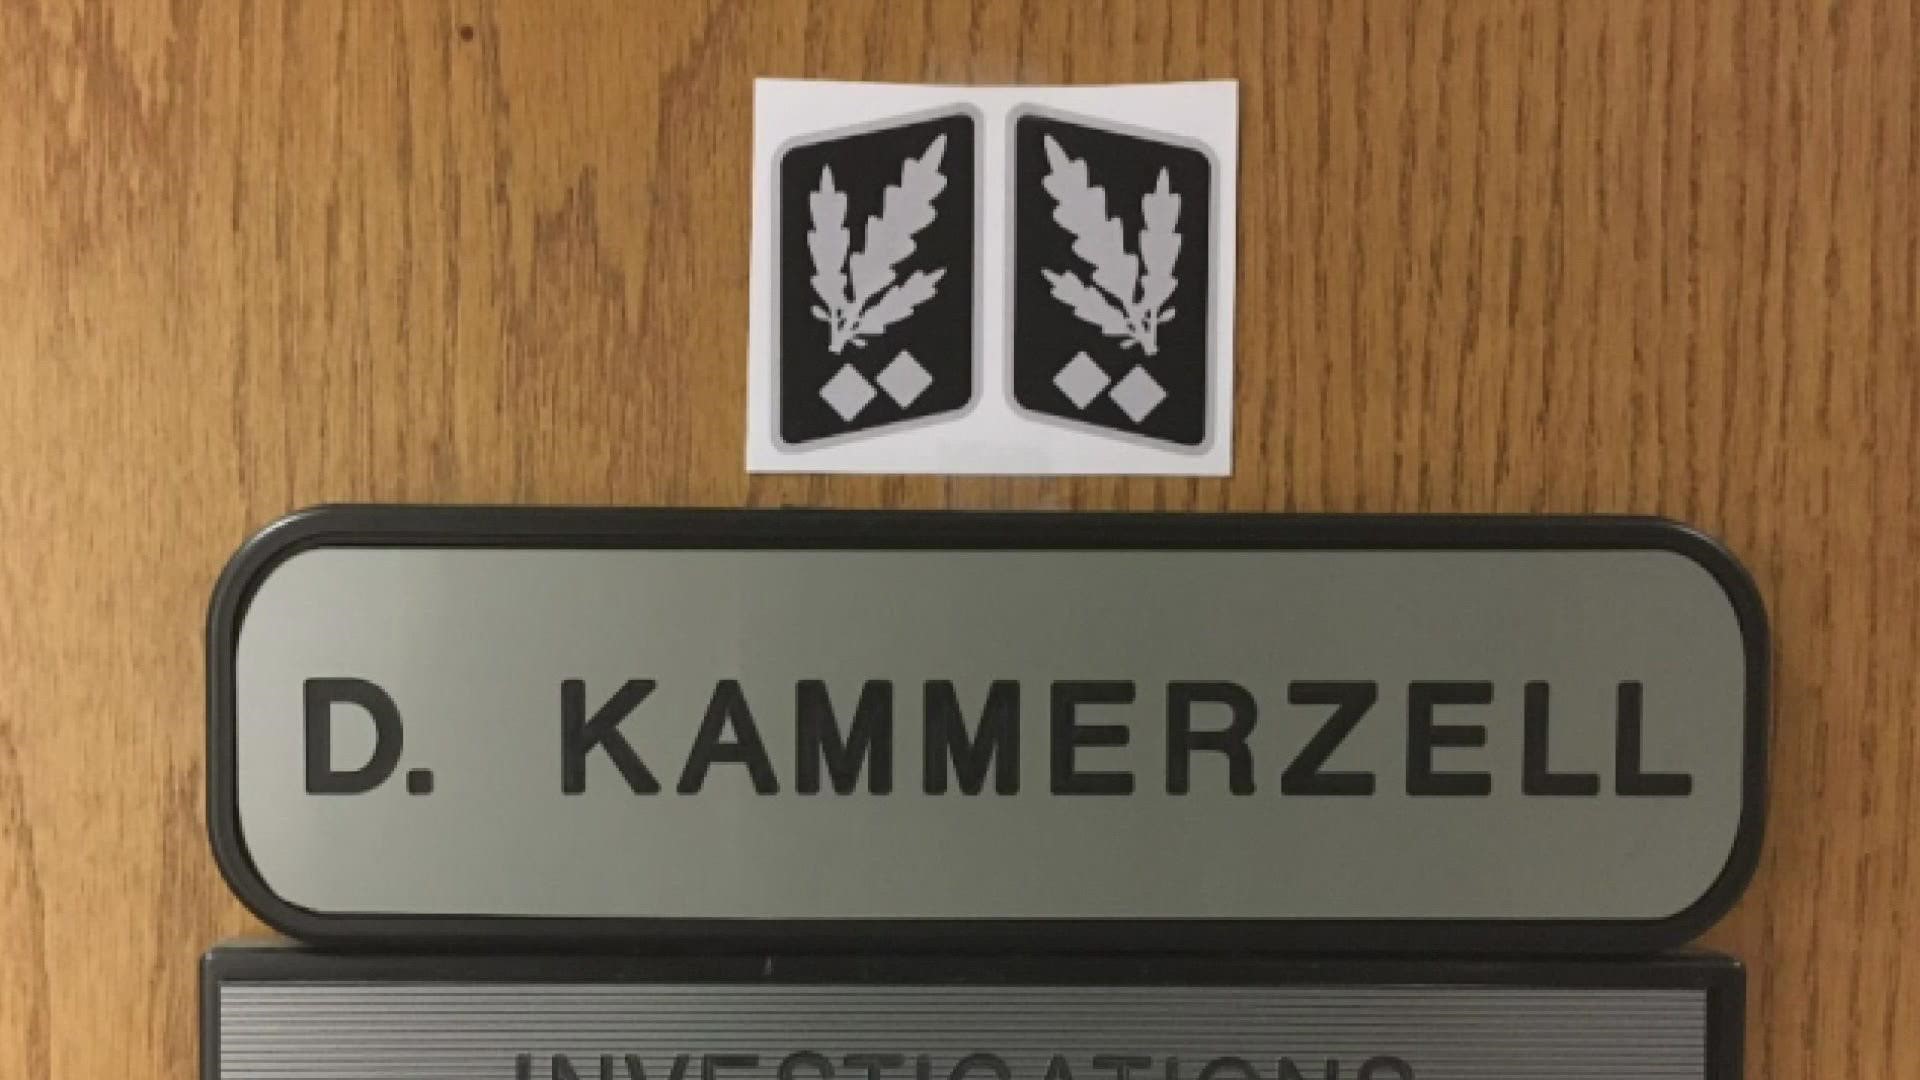 An assistant chief and 27-year veteran of the Kent Police Department was disciplined for displaying a Nazi insignia on his office door.